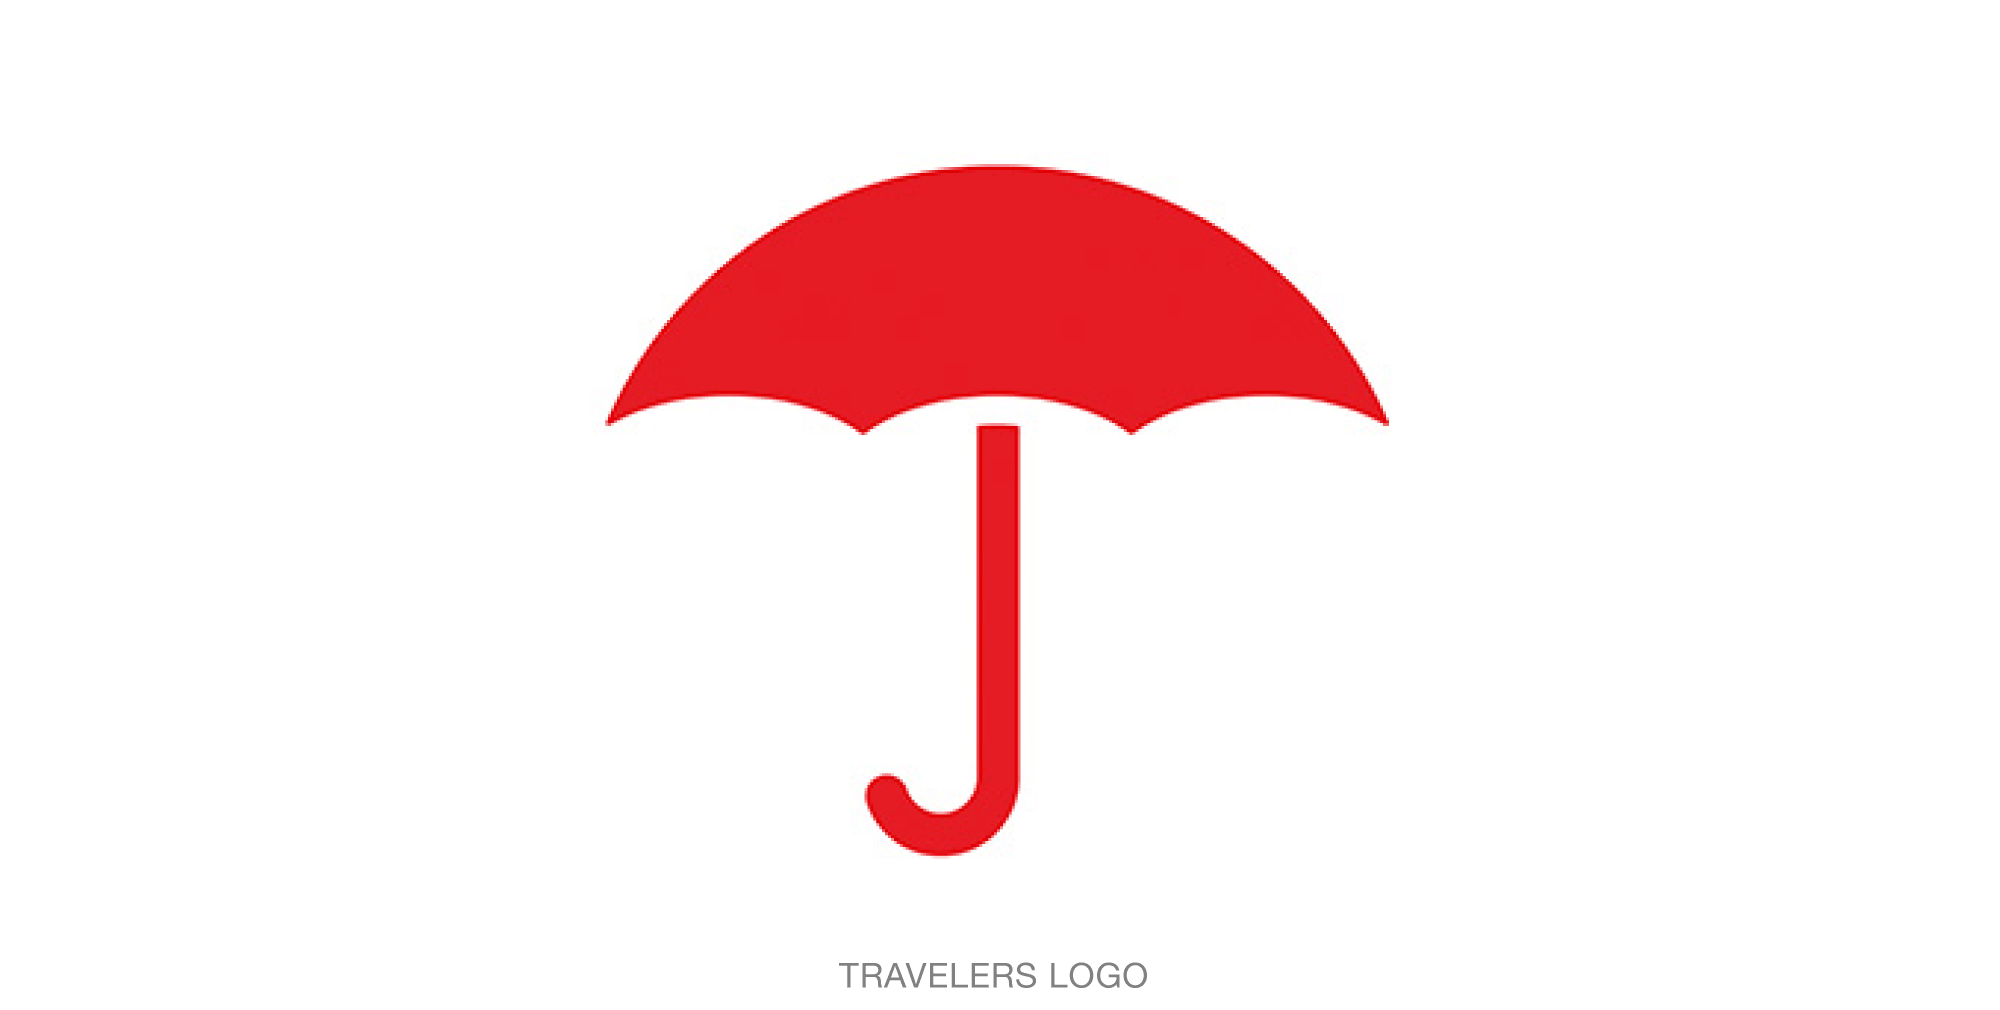 Travelers Logo - Travelers Sees Red | Articles | LogoLounge